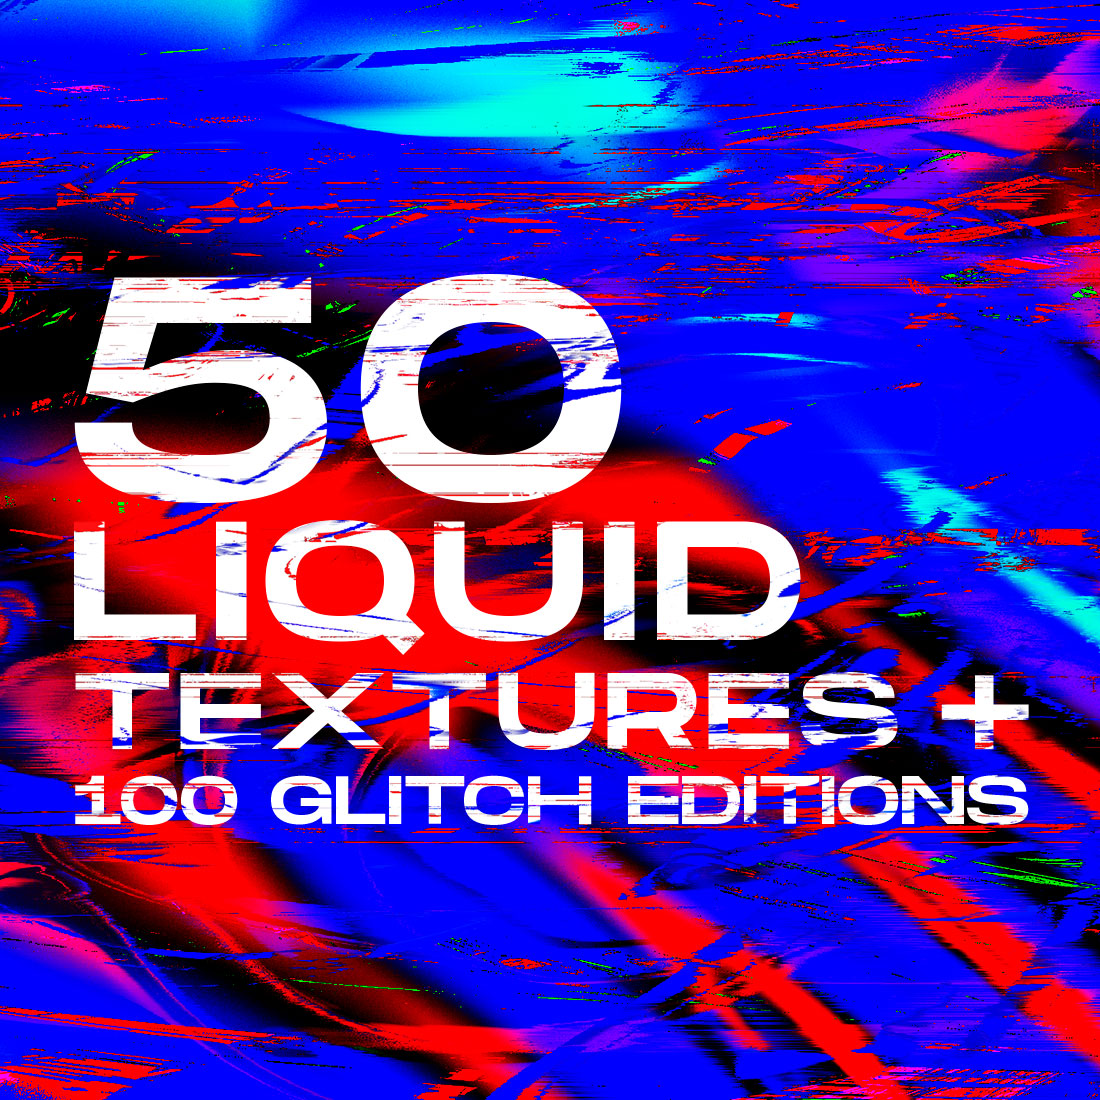 Liquid and Glitch Textures cover image.